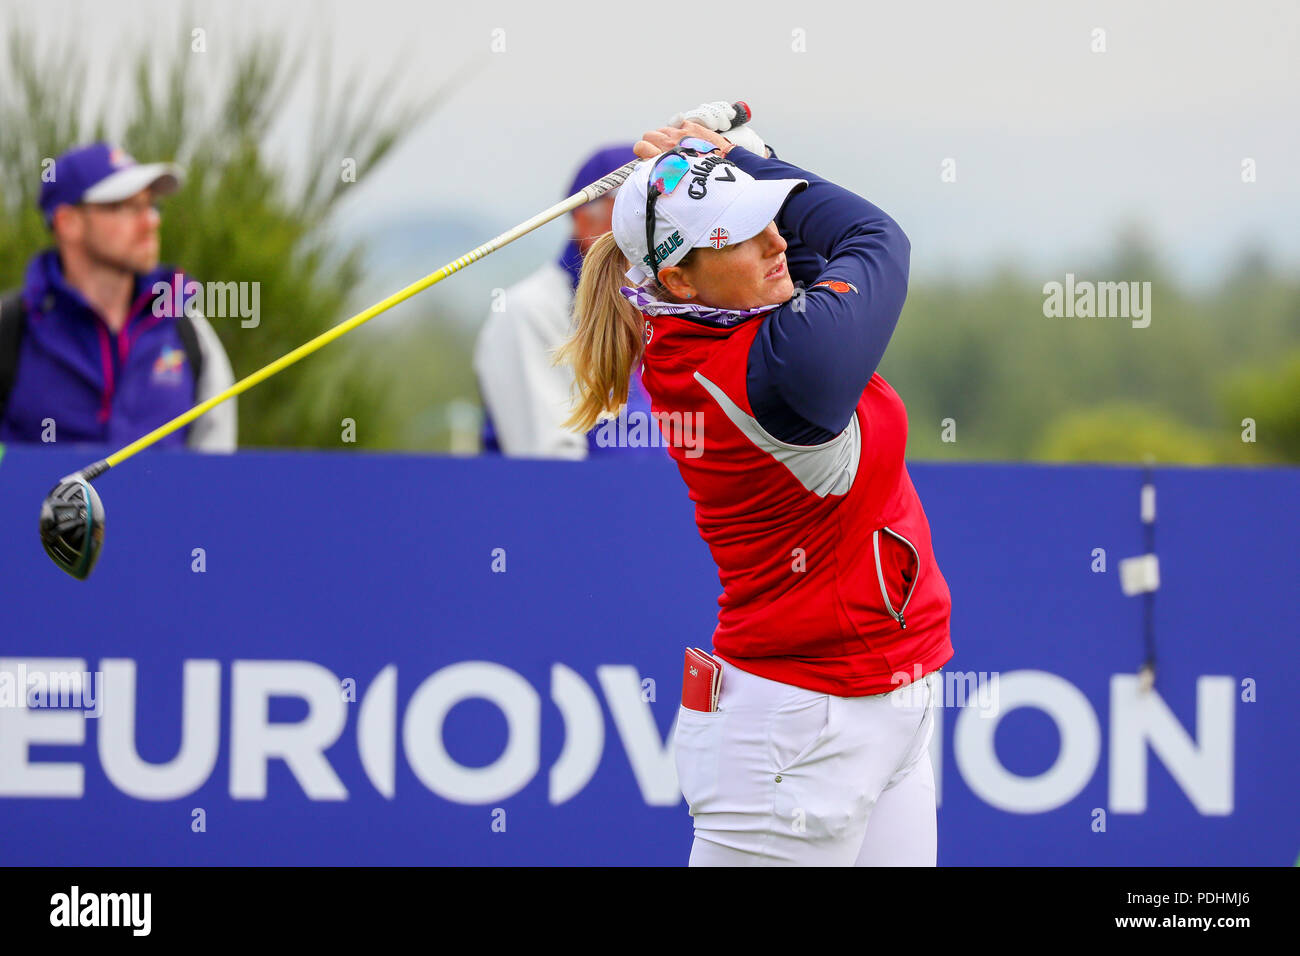 Gleneagles, Scotland, UK. 10th August, 2018. The Fourball Match Play continues with the pairing of Catriona Matthew and Holly Clyburn representing Great britain playing against Cajsa Persson and Linda Wessberg of Sweden. Clyburn teeing off at the second Credit: Findlay/Alamy Live News Stock Photo